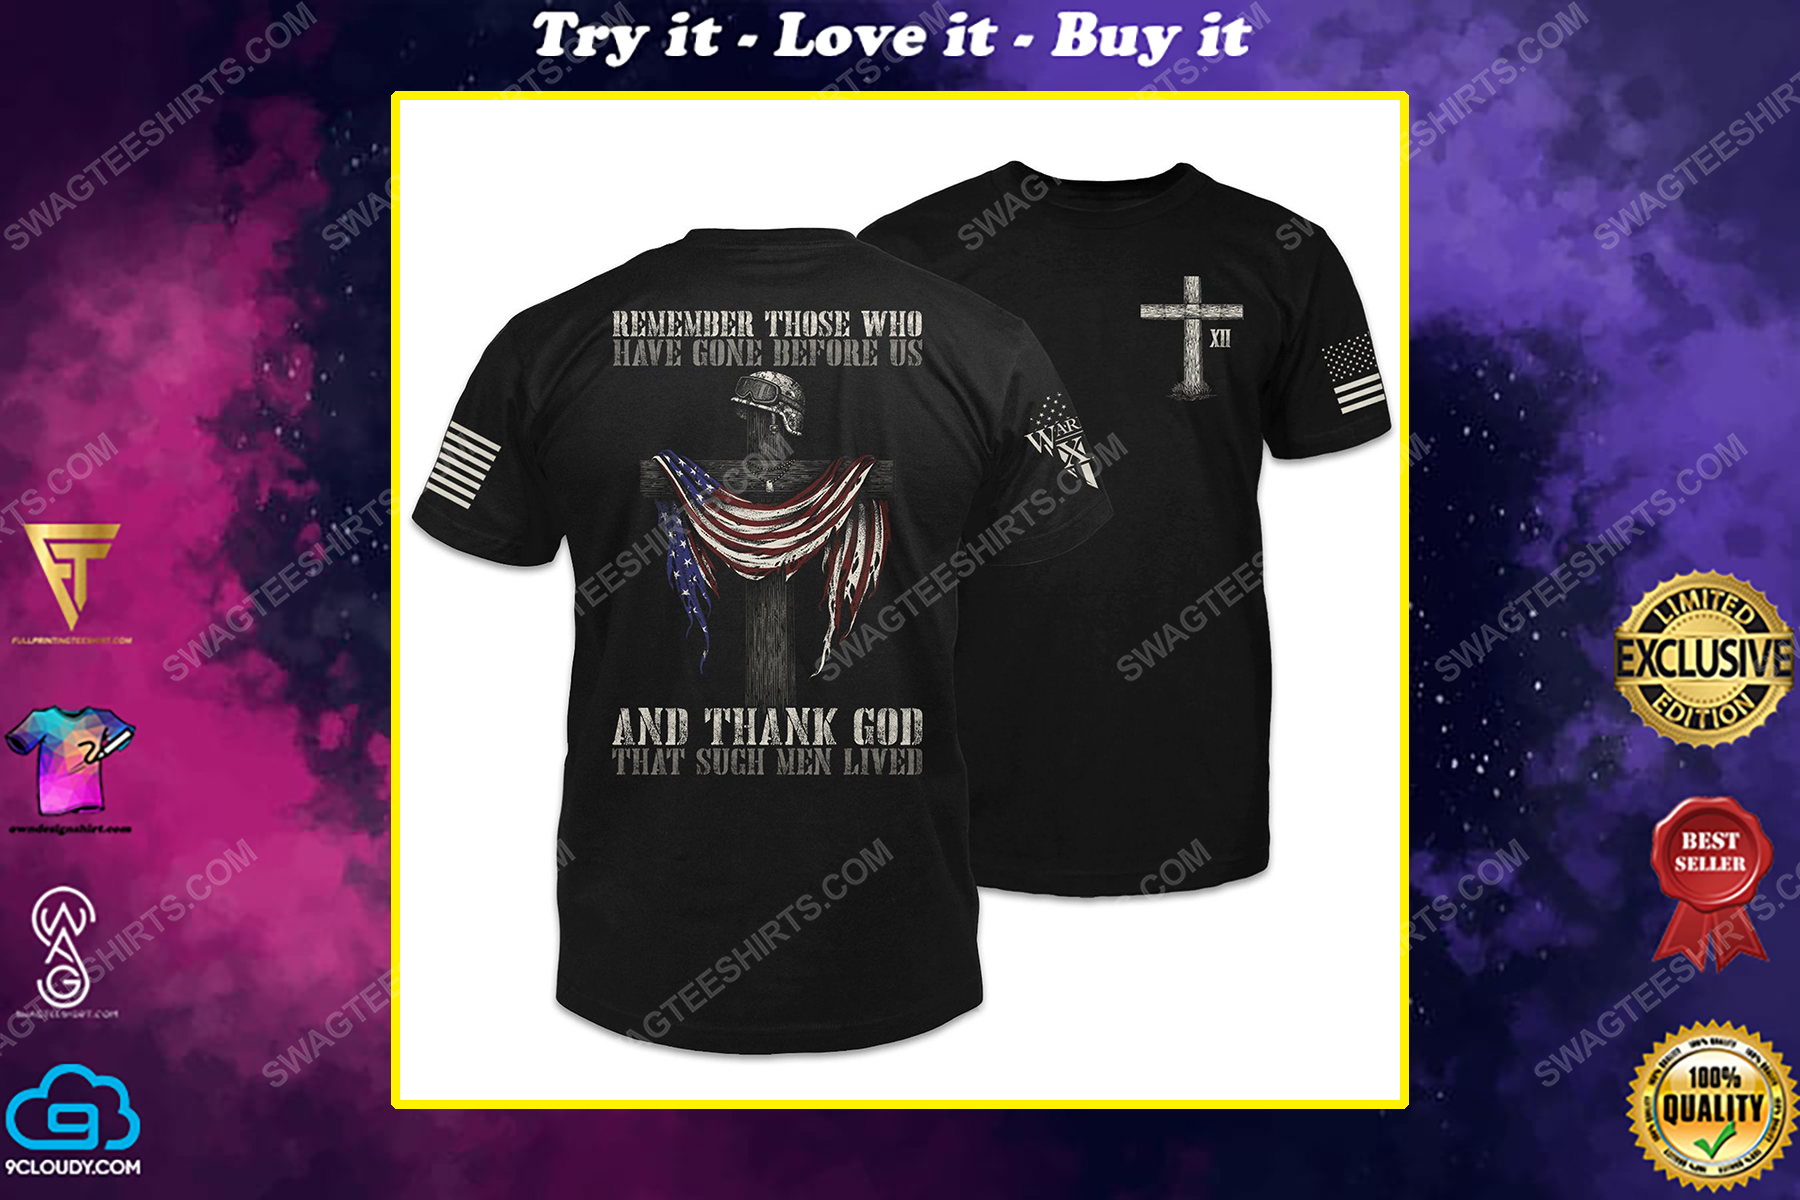 Remember those who have gone before us and thank god that such men lived shirt